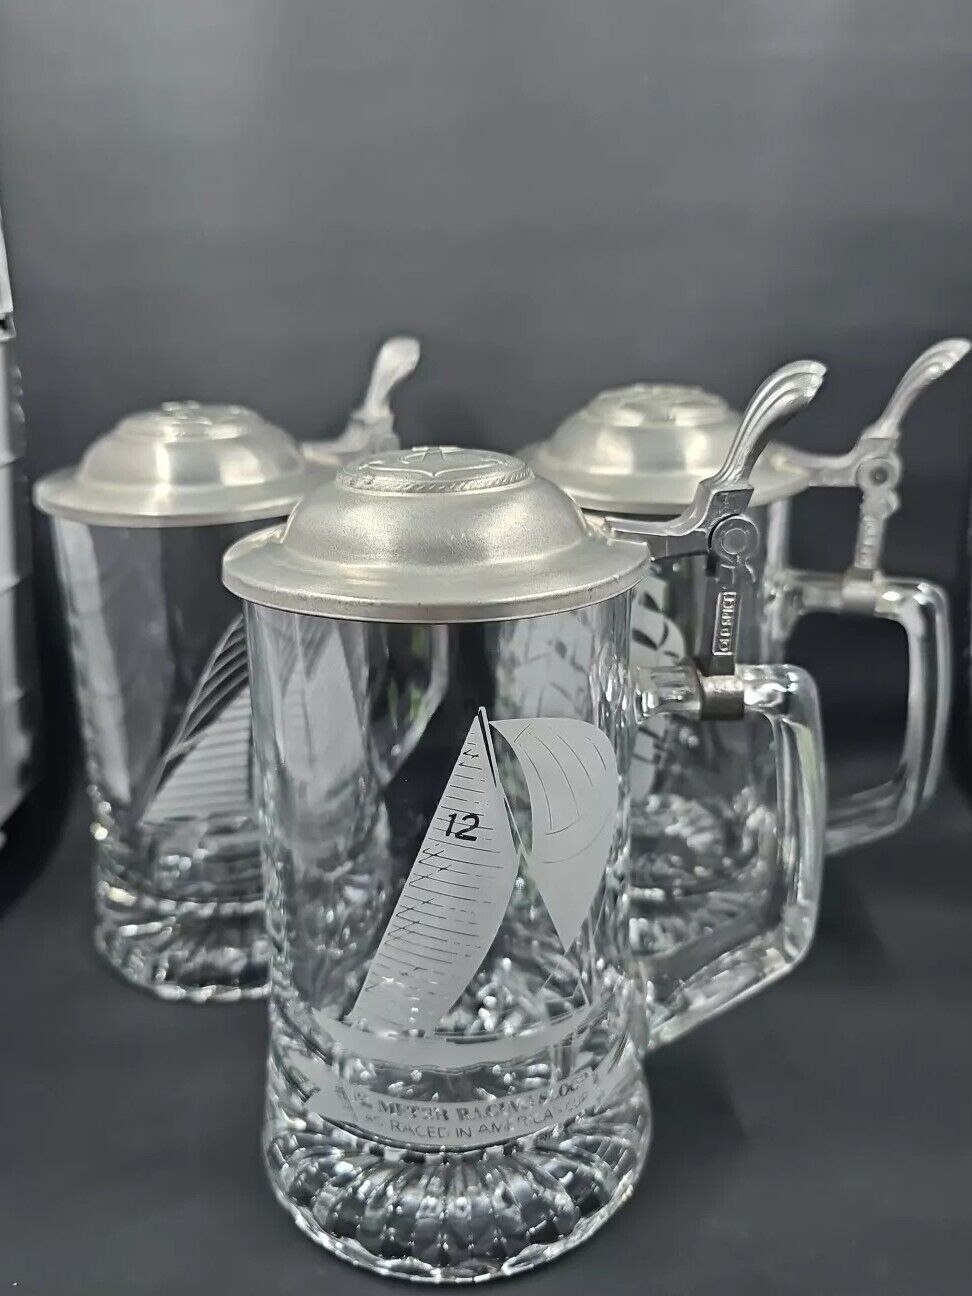  Vintage Old Spice Beer Steins Glass Etched Ships Nautical Germany Set of 3 Mugs